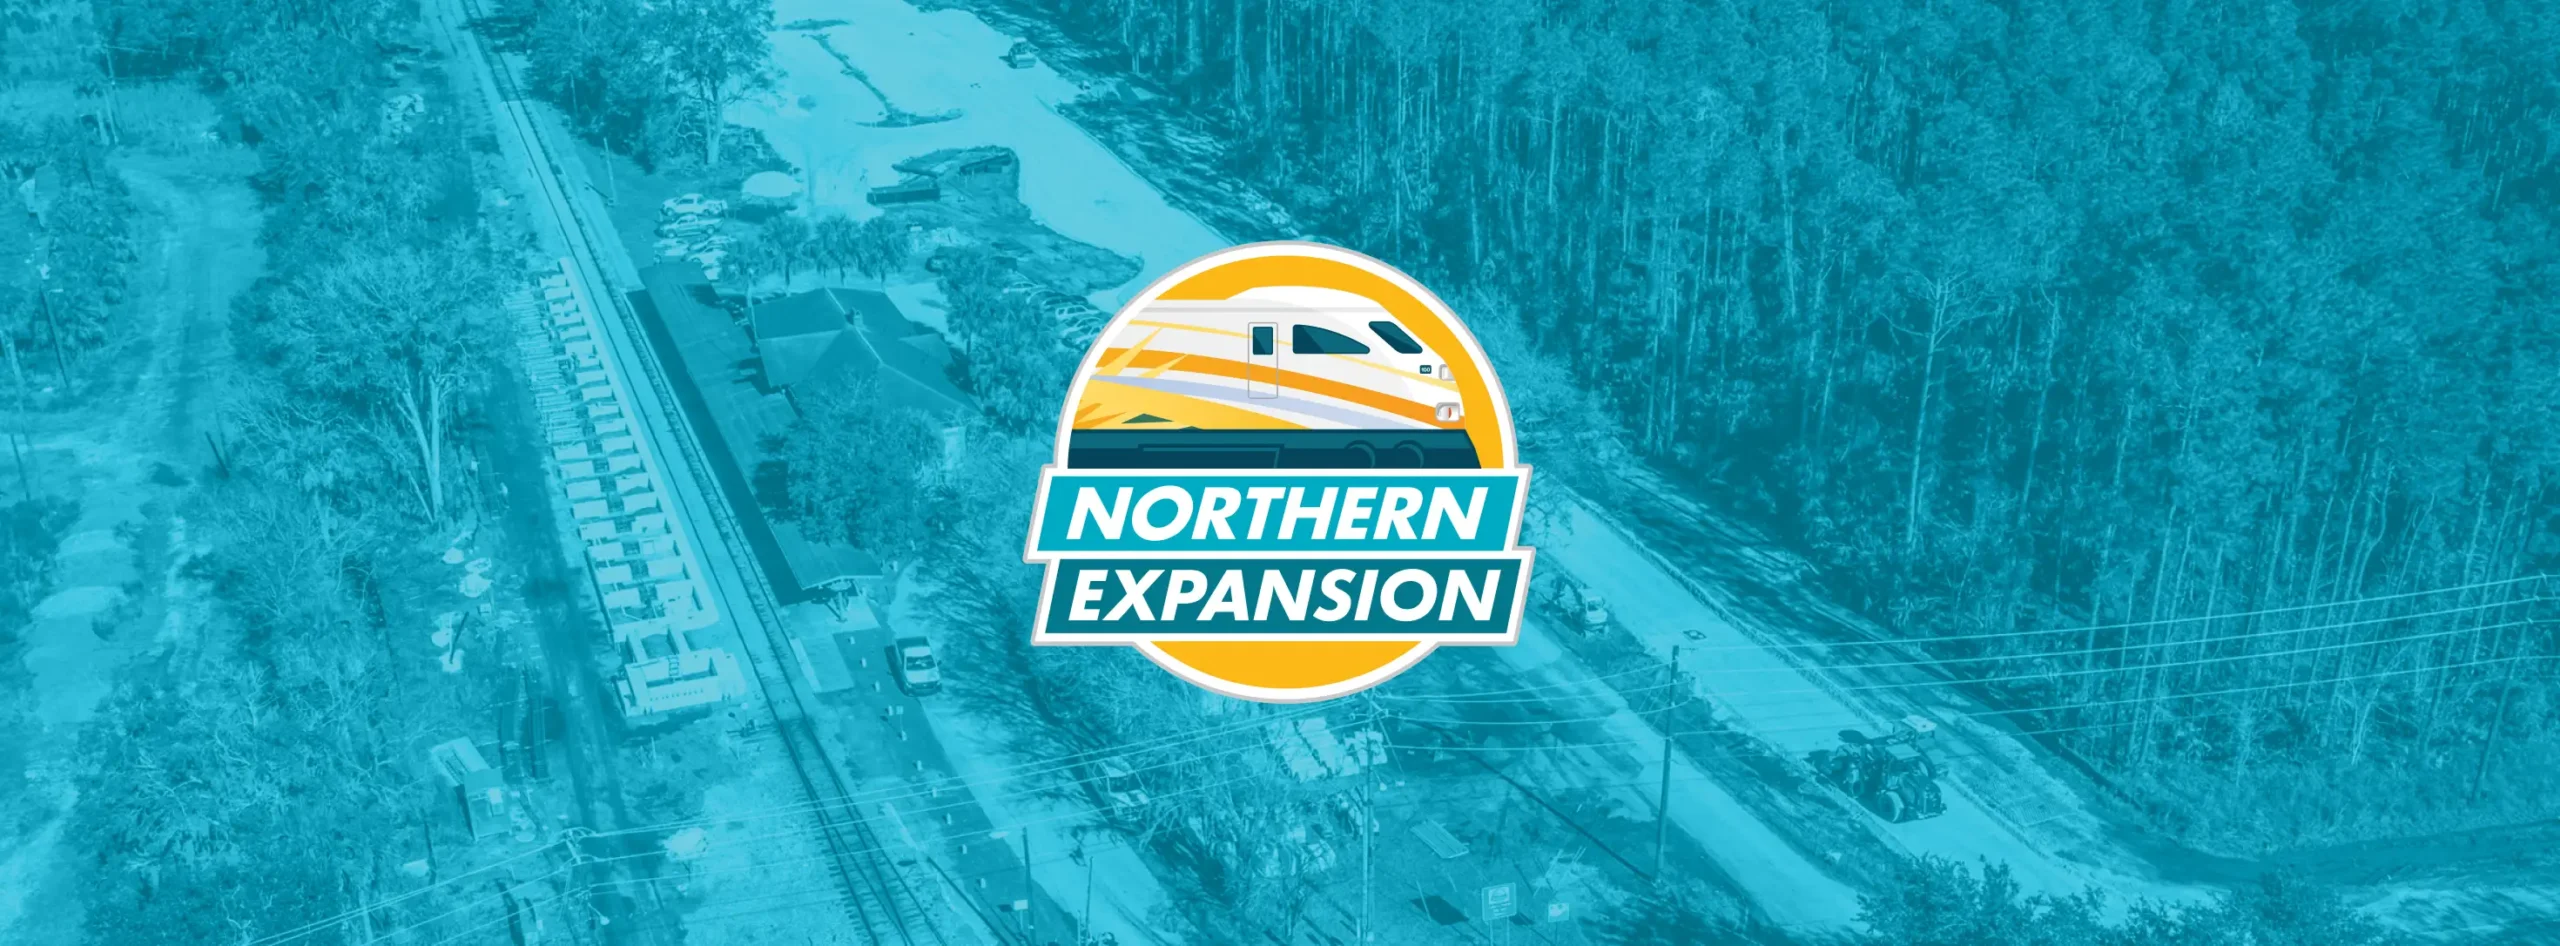 Masthead image - Aerial image of DeLand Station construction with overlayed Northern Expansion logo.